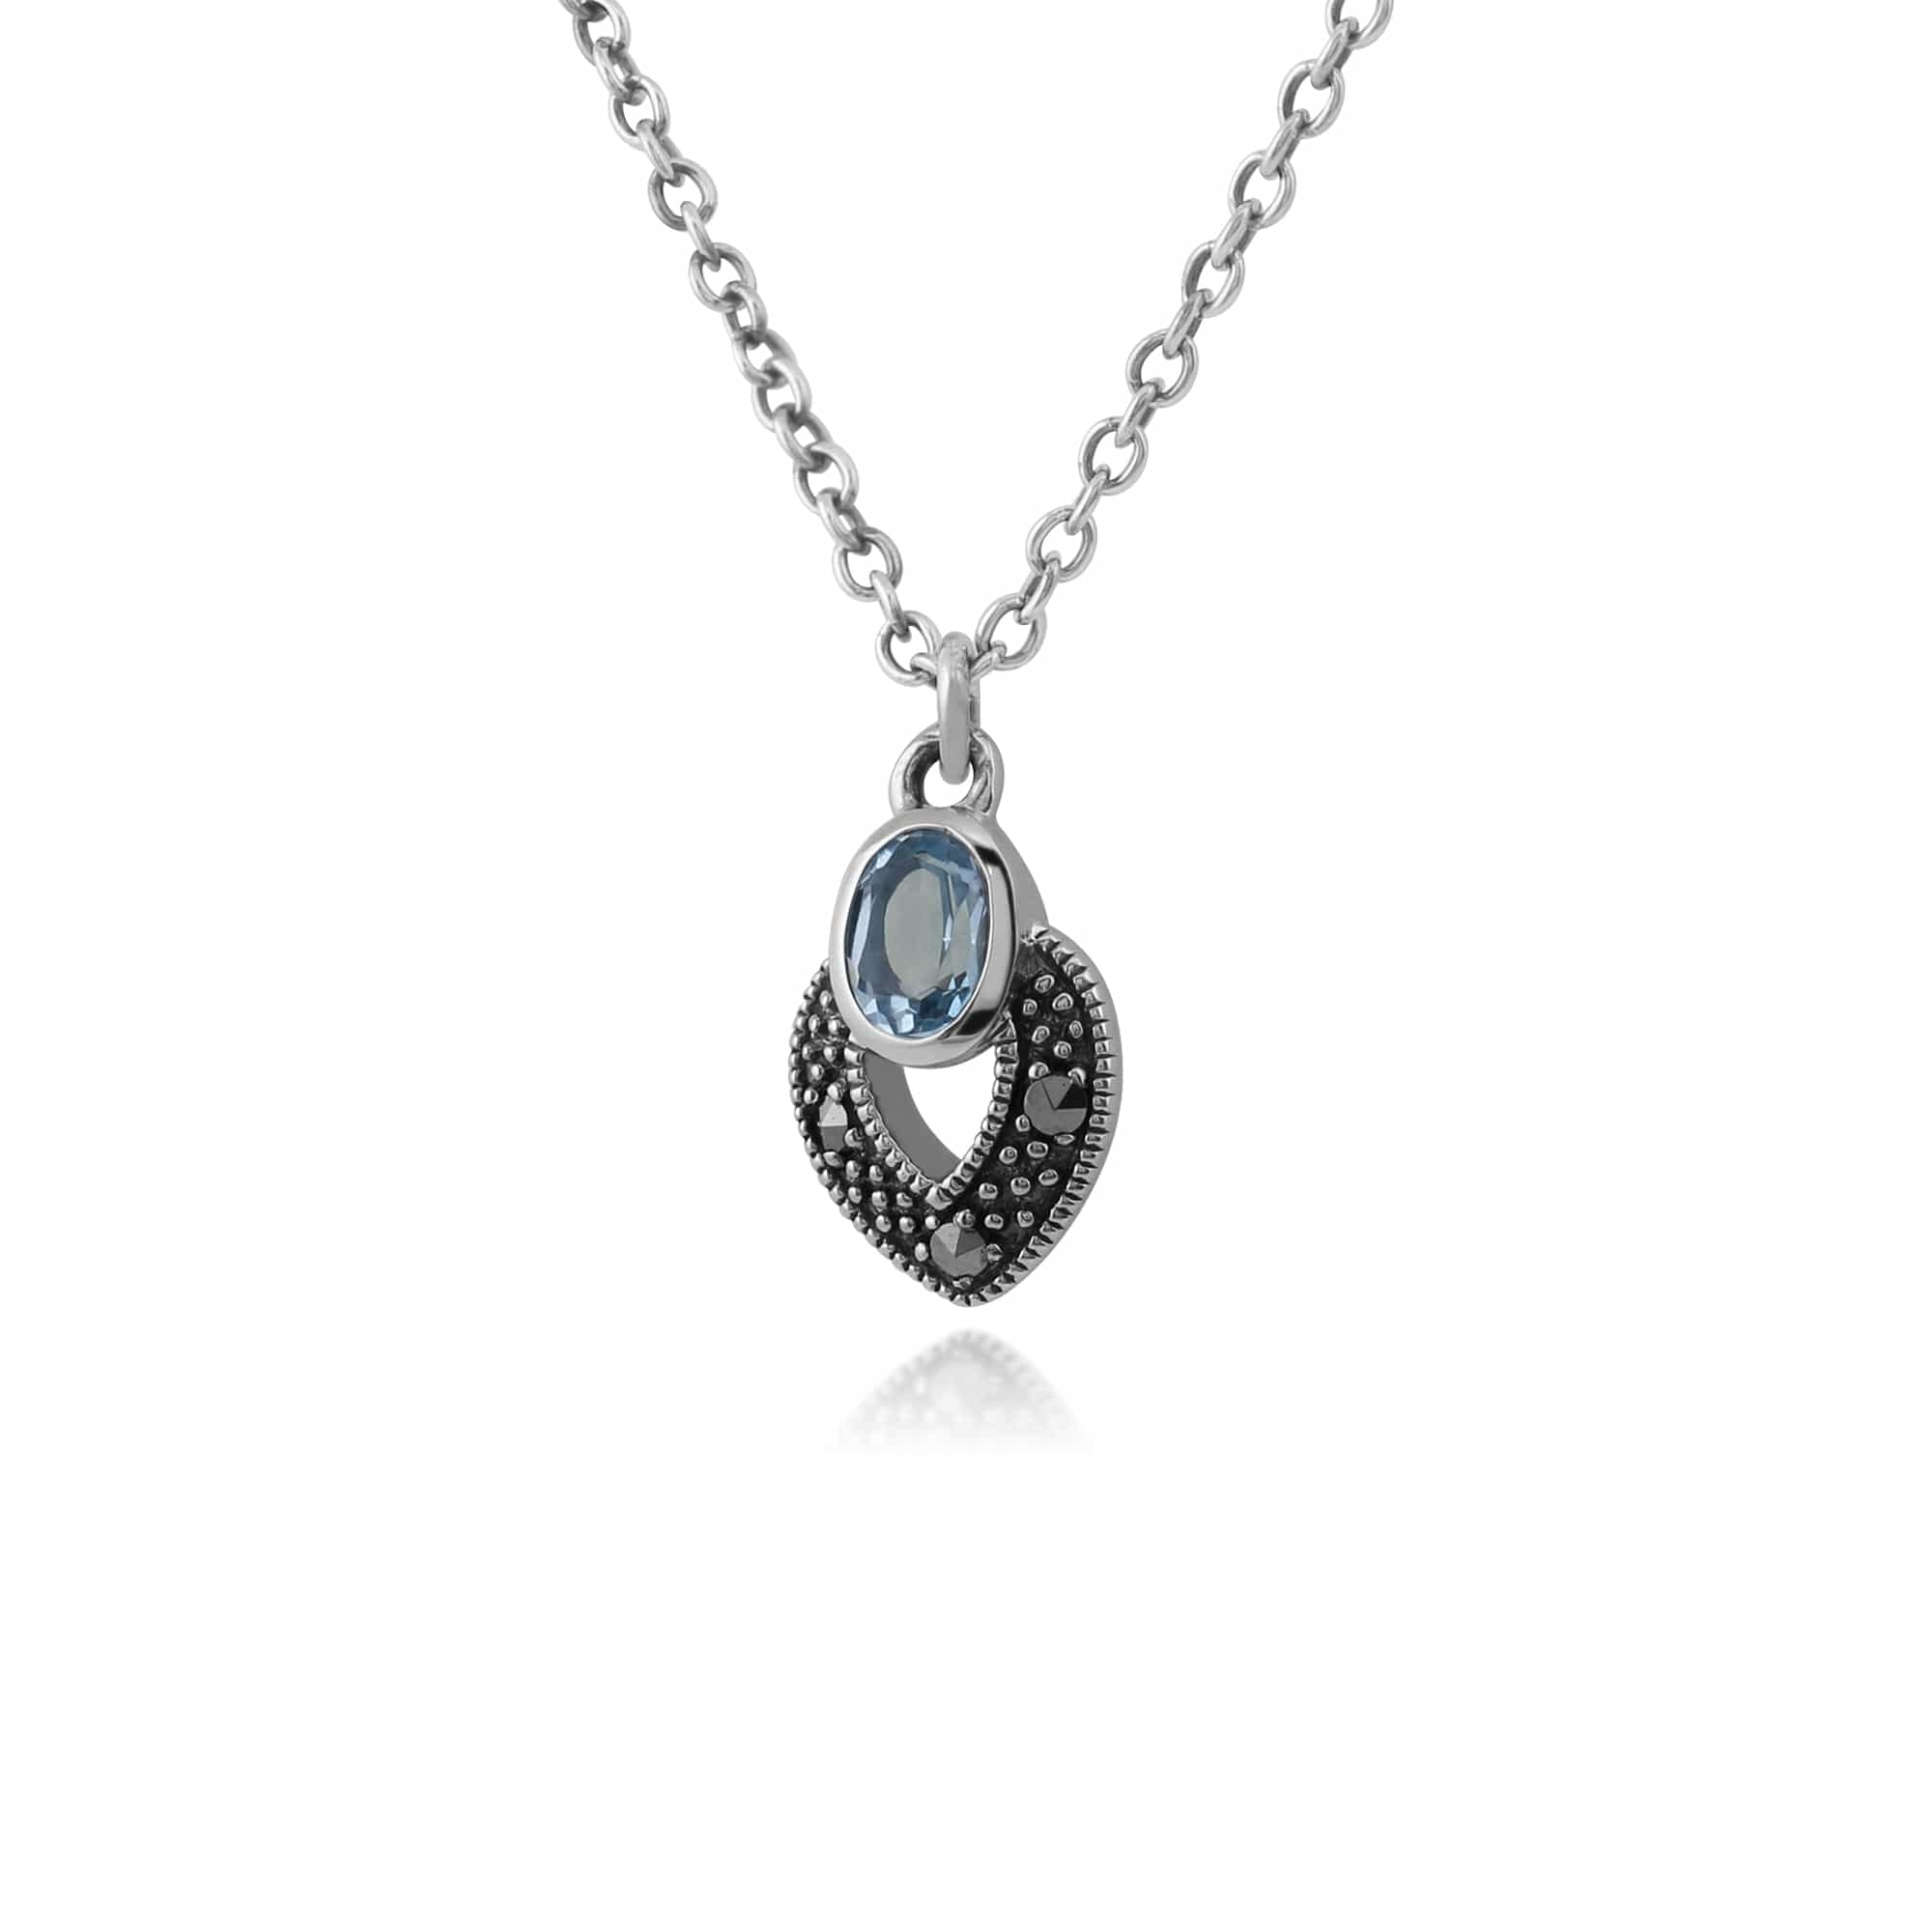 214N688207925 Art Deco Style Oval Blue Topaz & Marcasite Necklace in 925 Sterling Silver 2